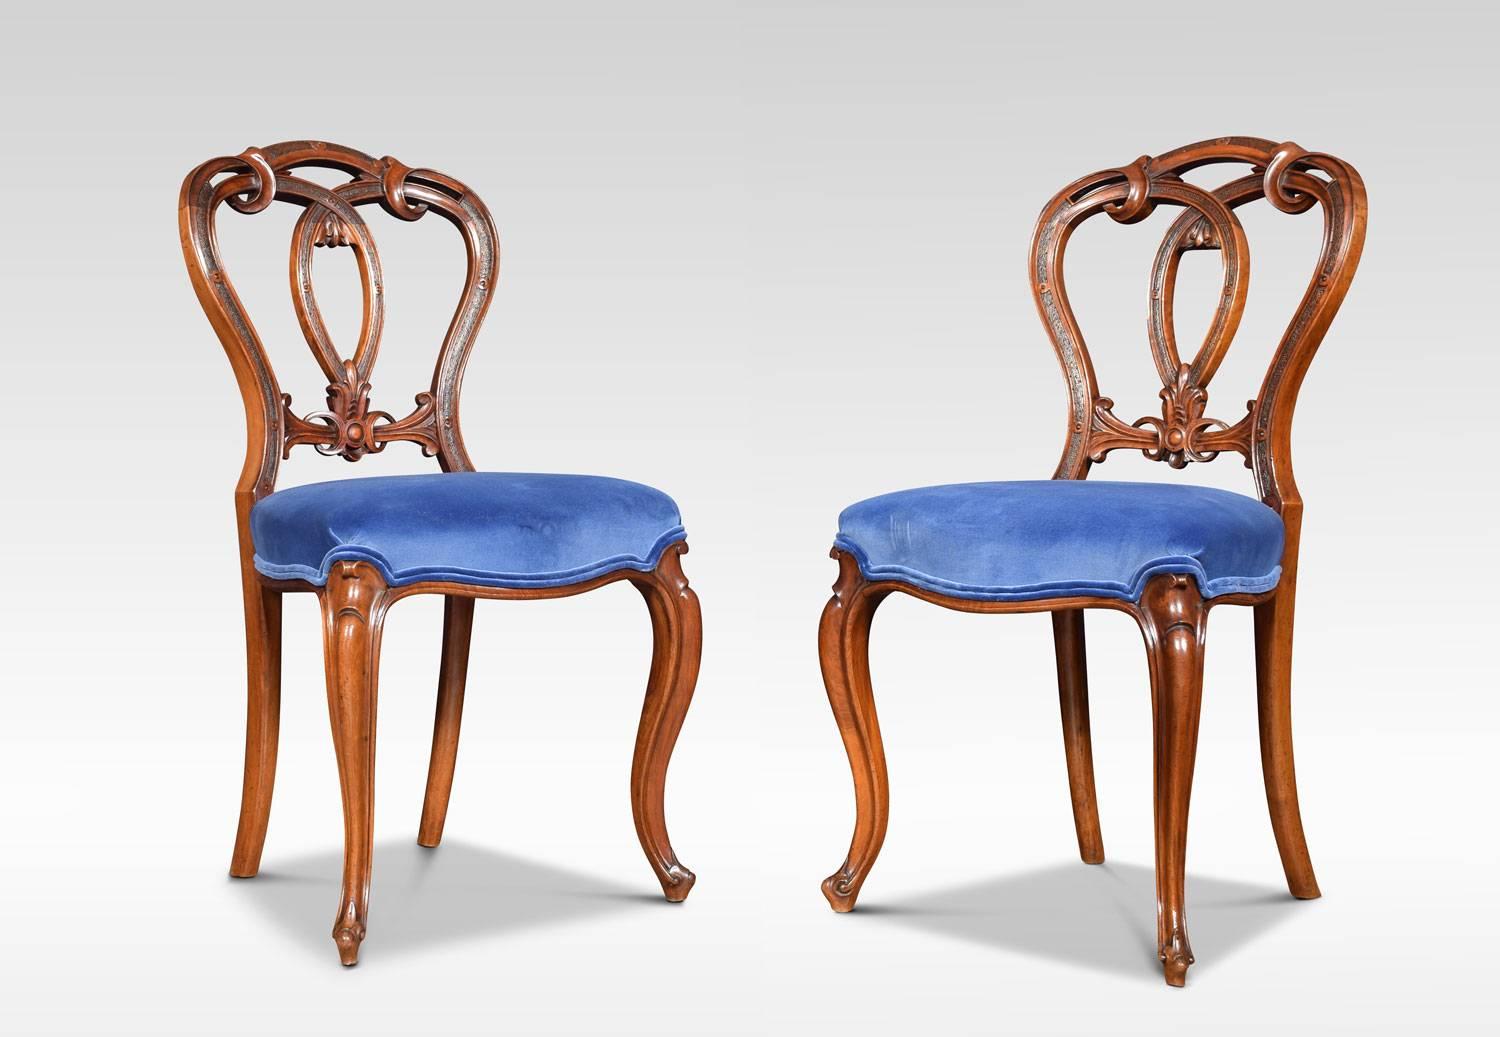 A set of six Victorian walnut dining room chairs with oval-shaped backs having delicately cartouche and scroll carved crested centre, to the over-stuffed blue velvet seats, all raised up on shaped cabriole legs
Dimensions:
Height 34.5 inches,